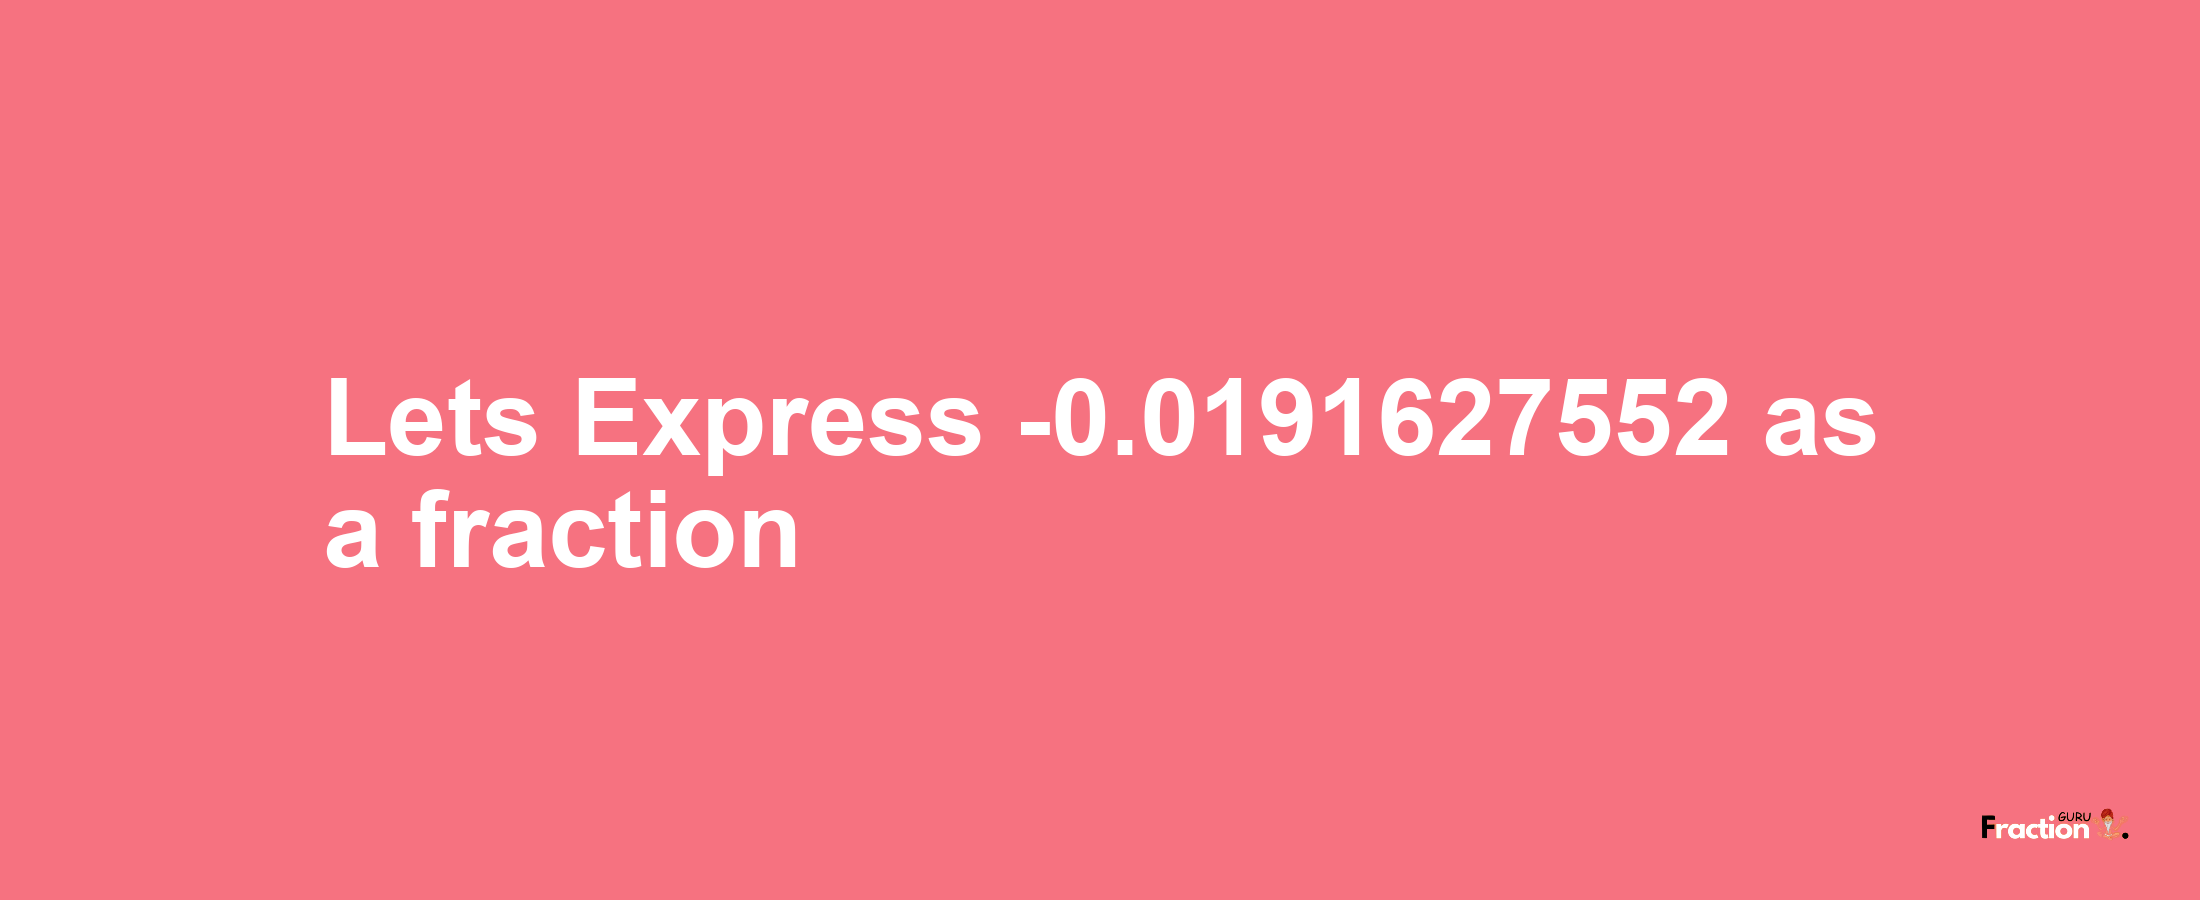 Lets Express -0.0191627552 as afraction